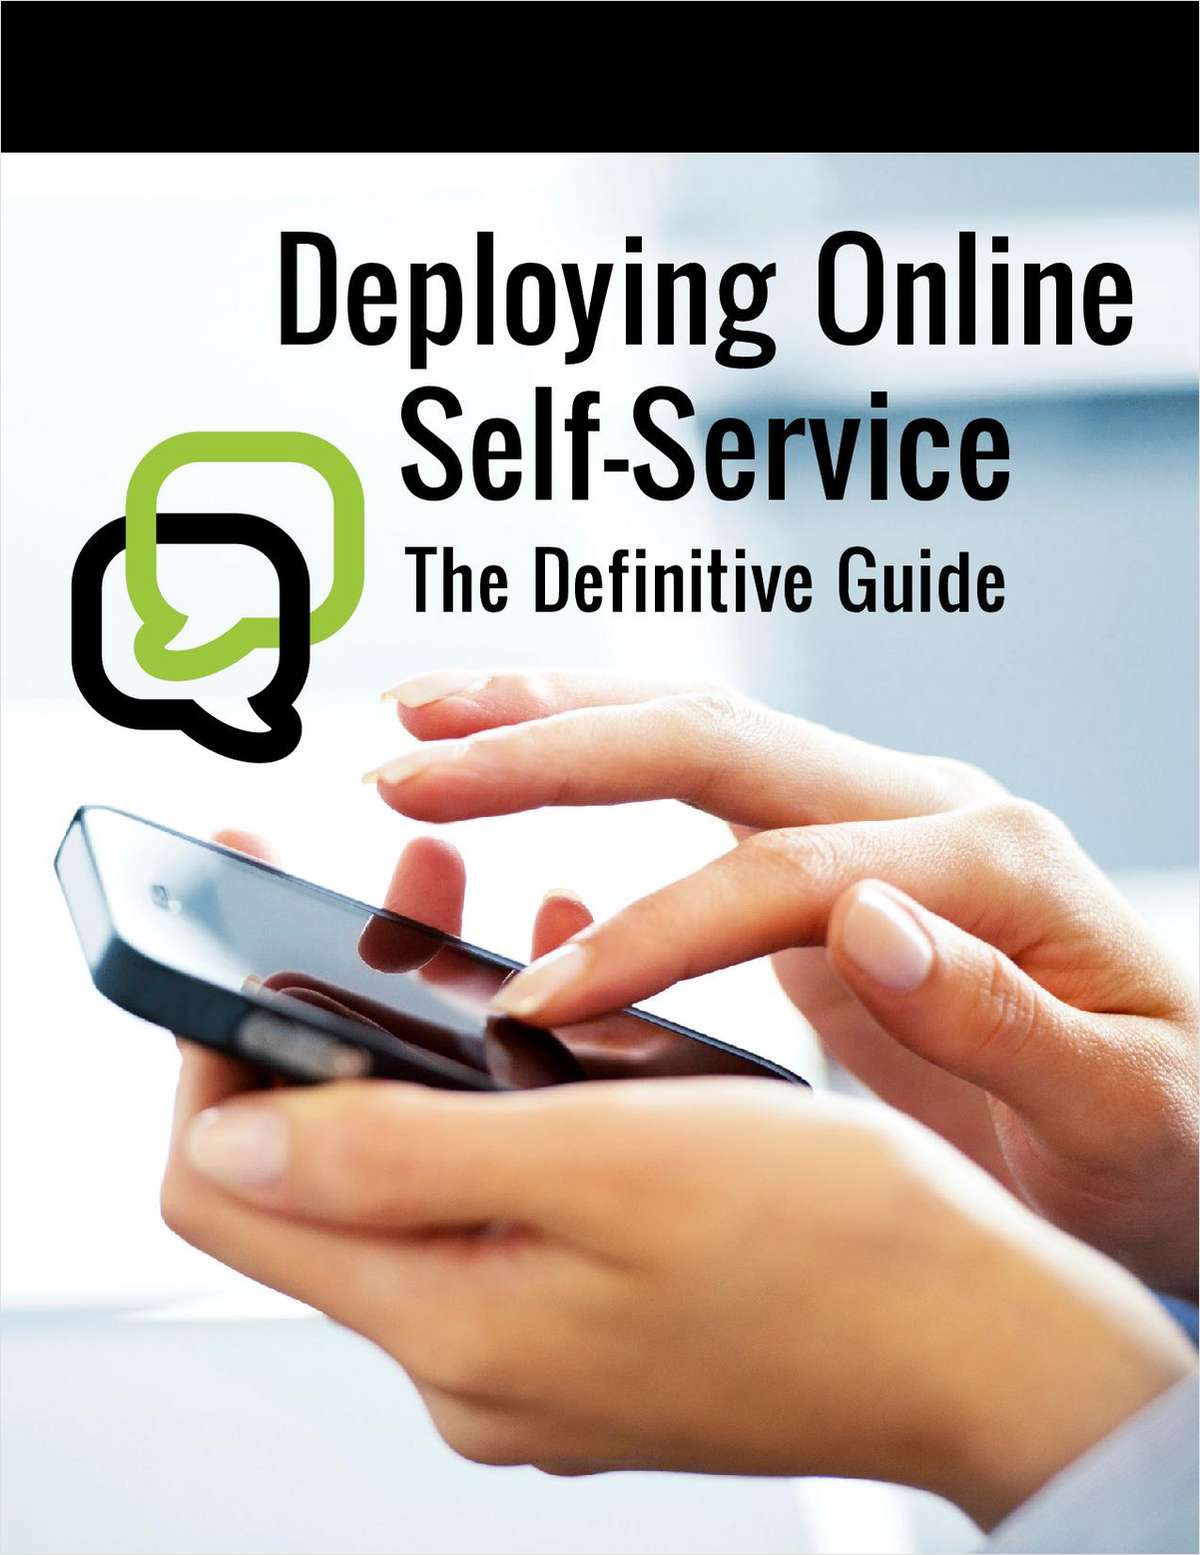 Deploying Online Self-Service: The Definitive Guide